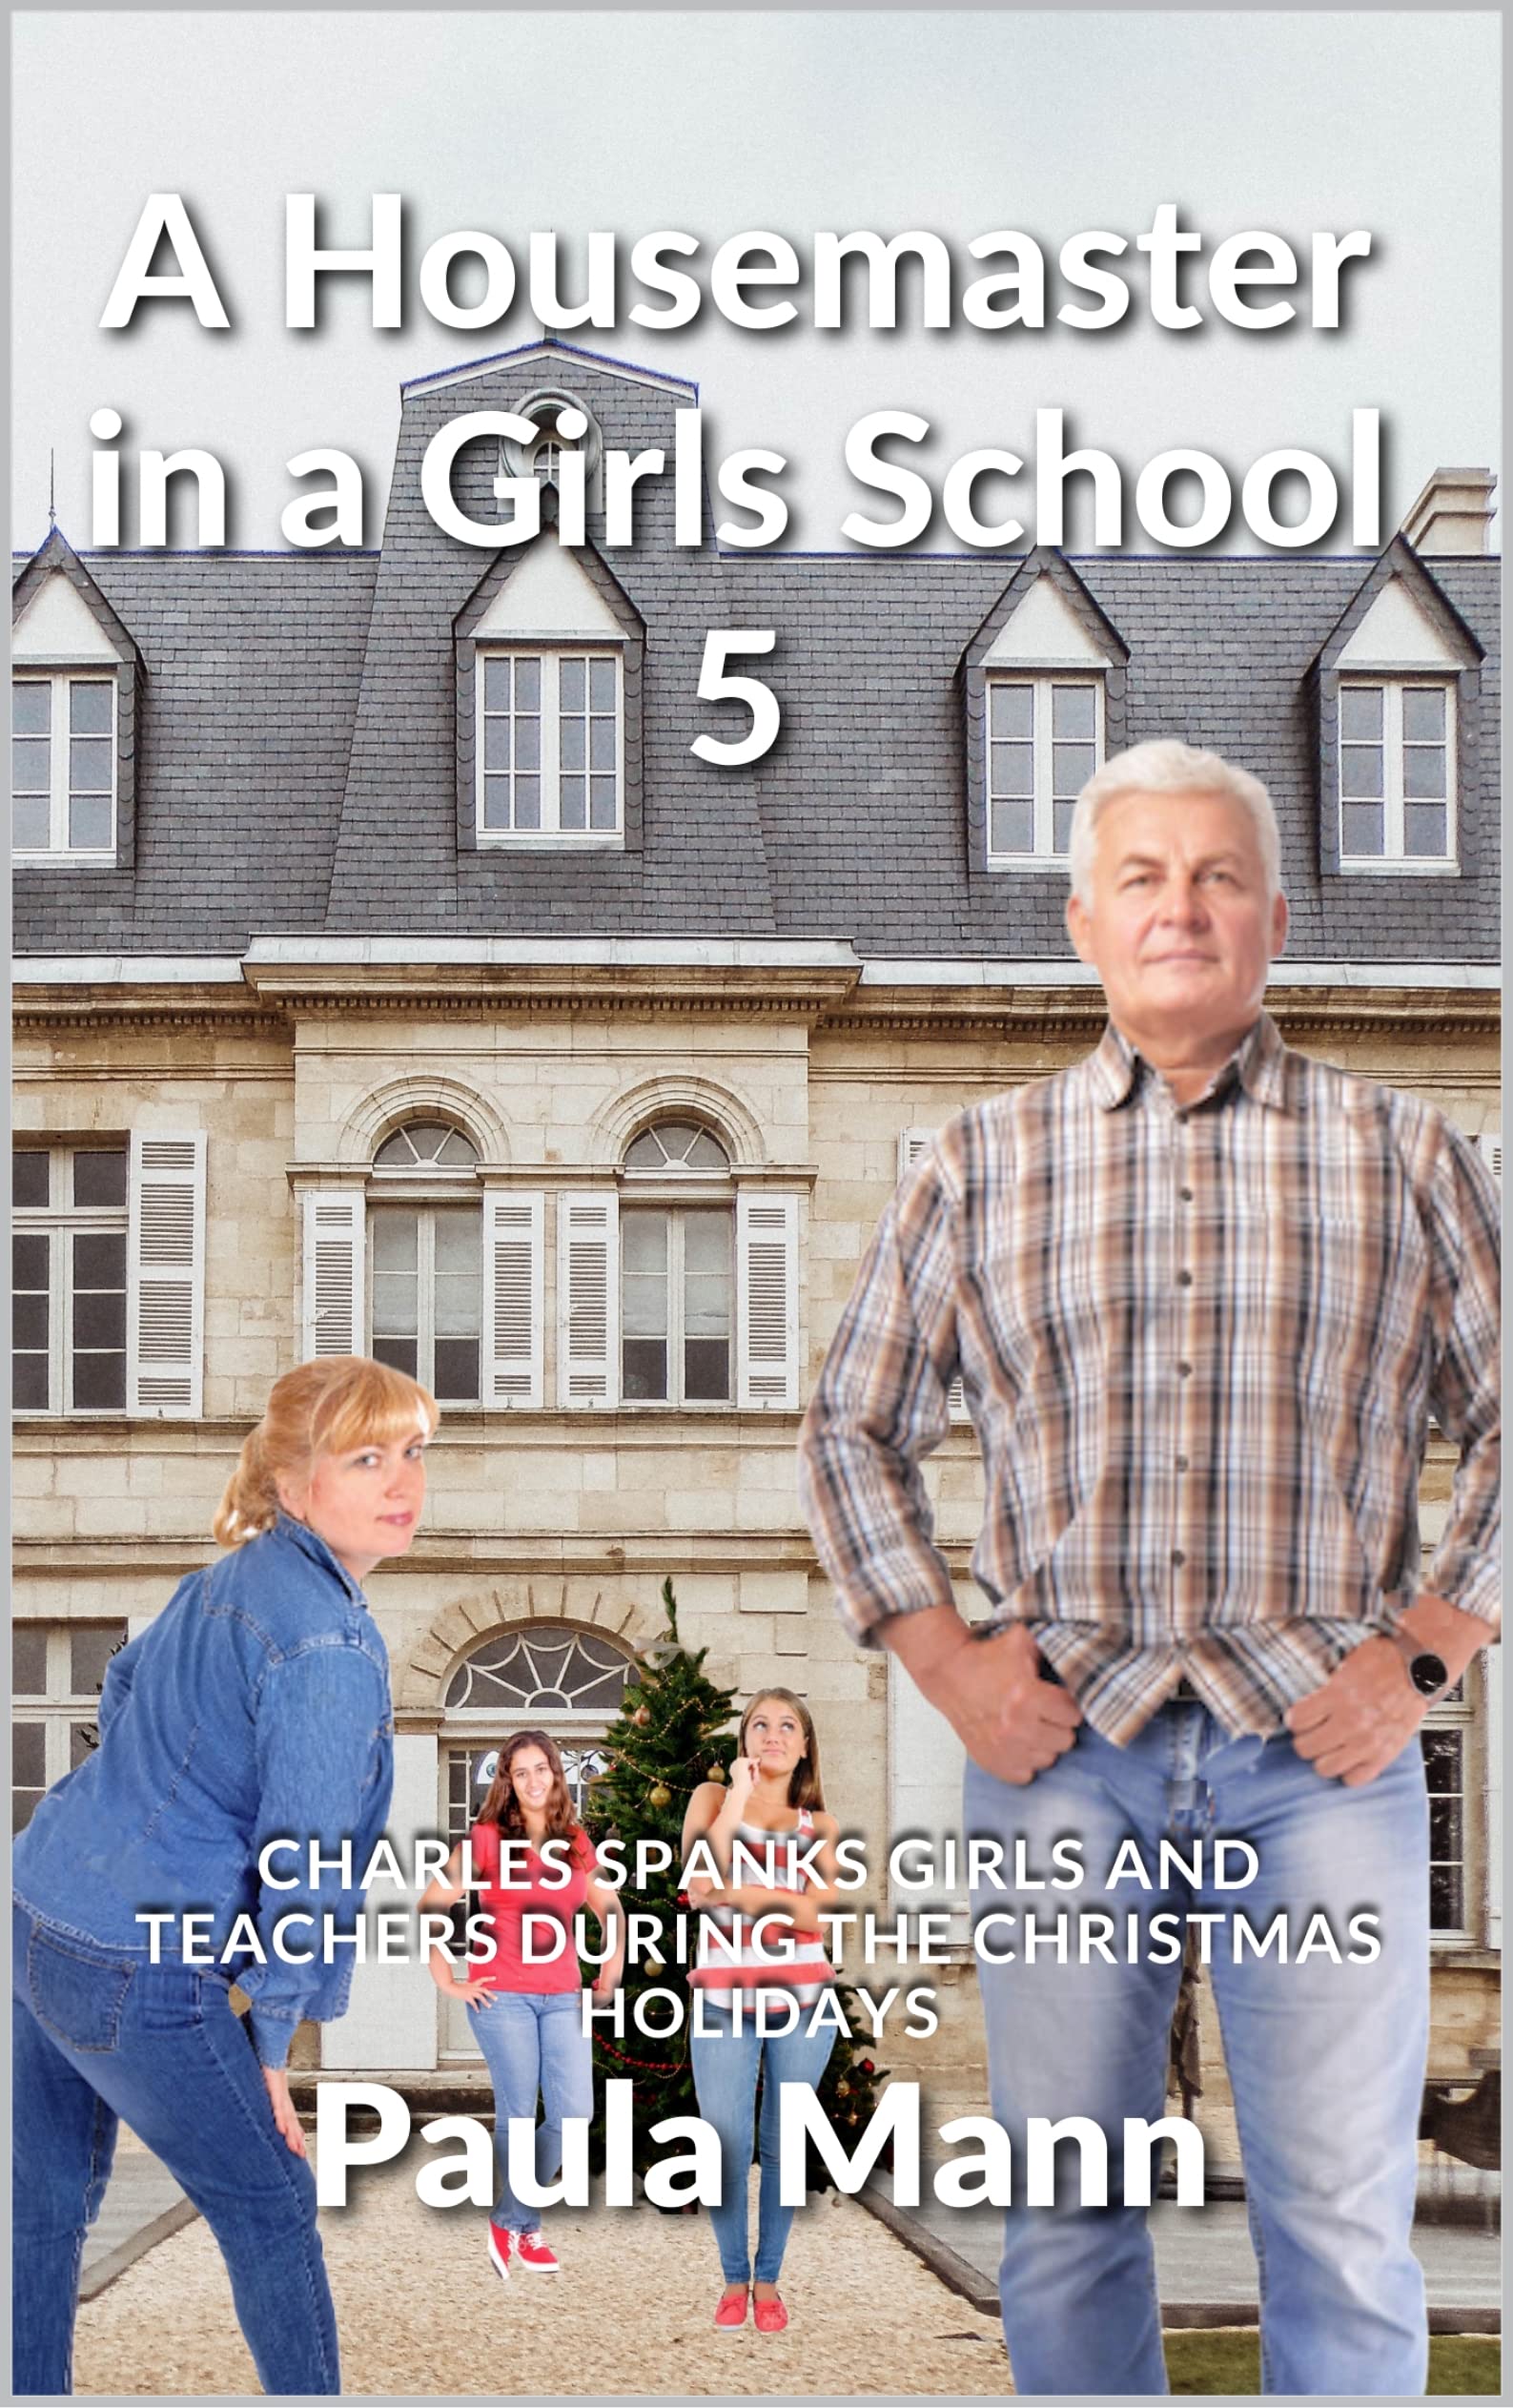 dan slover recommends naughty school girls getting spanked pic